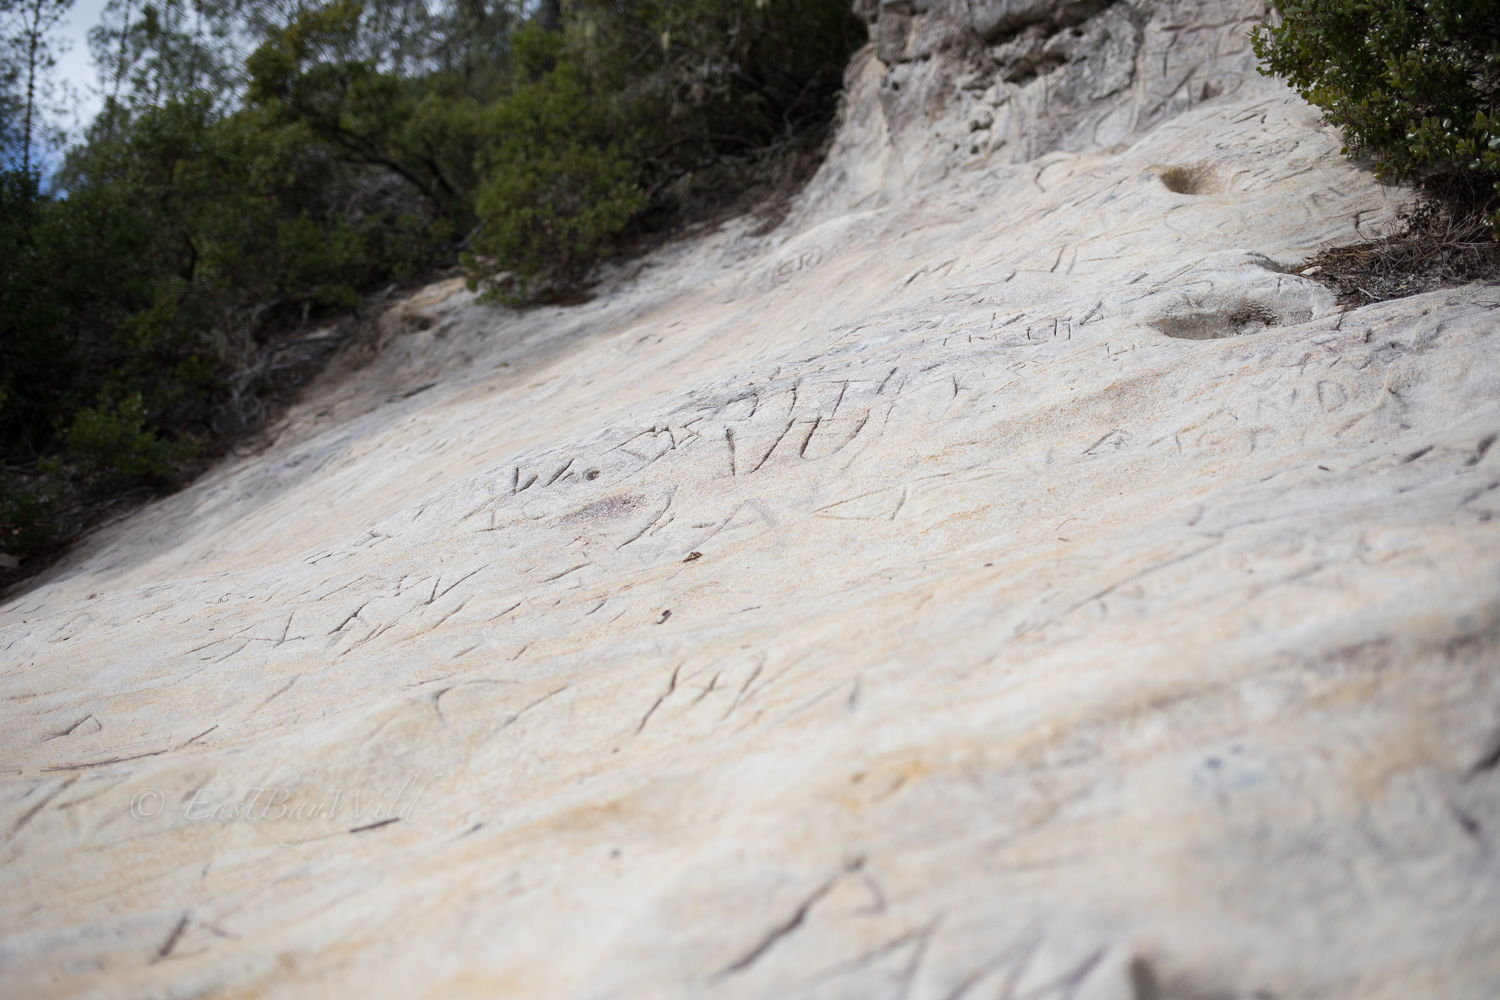 Sandstone etched with graffiti